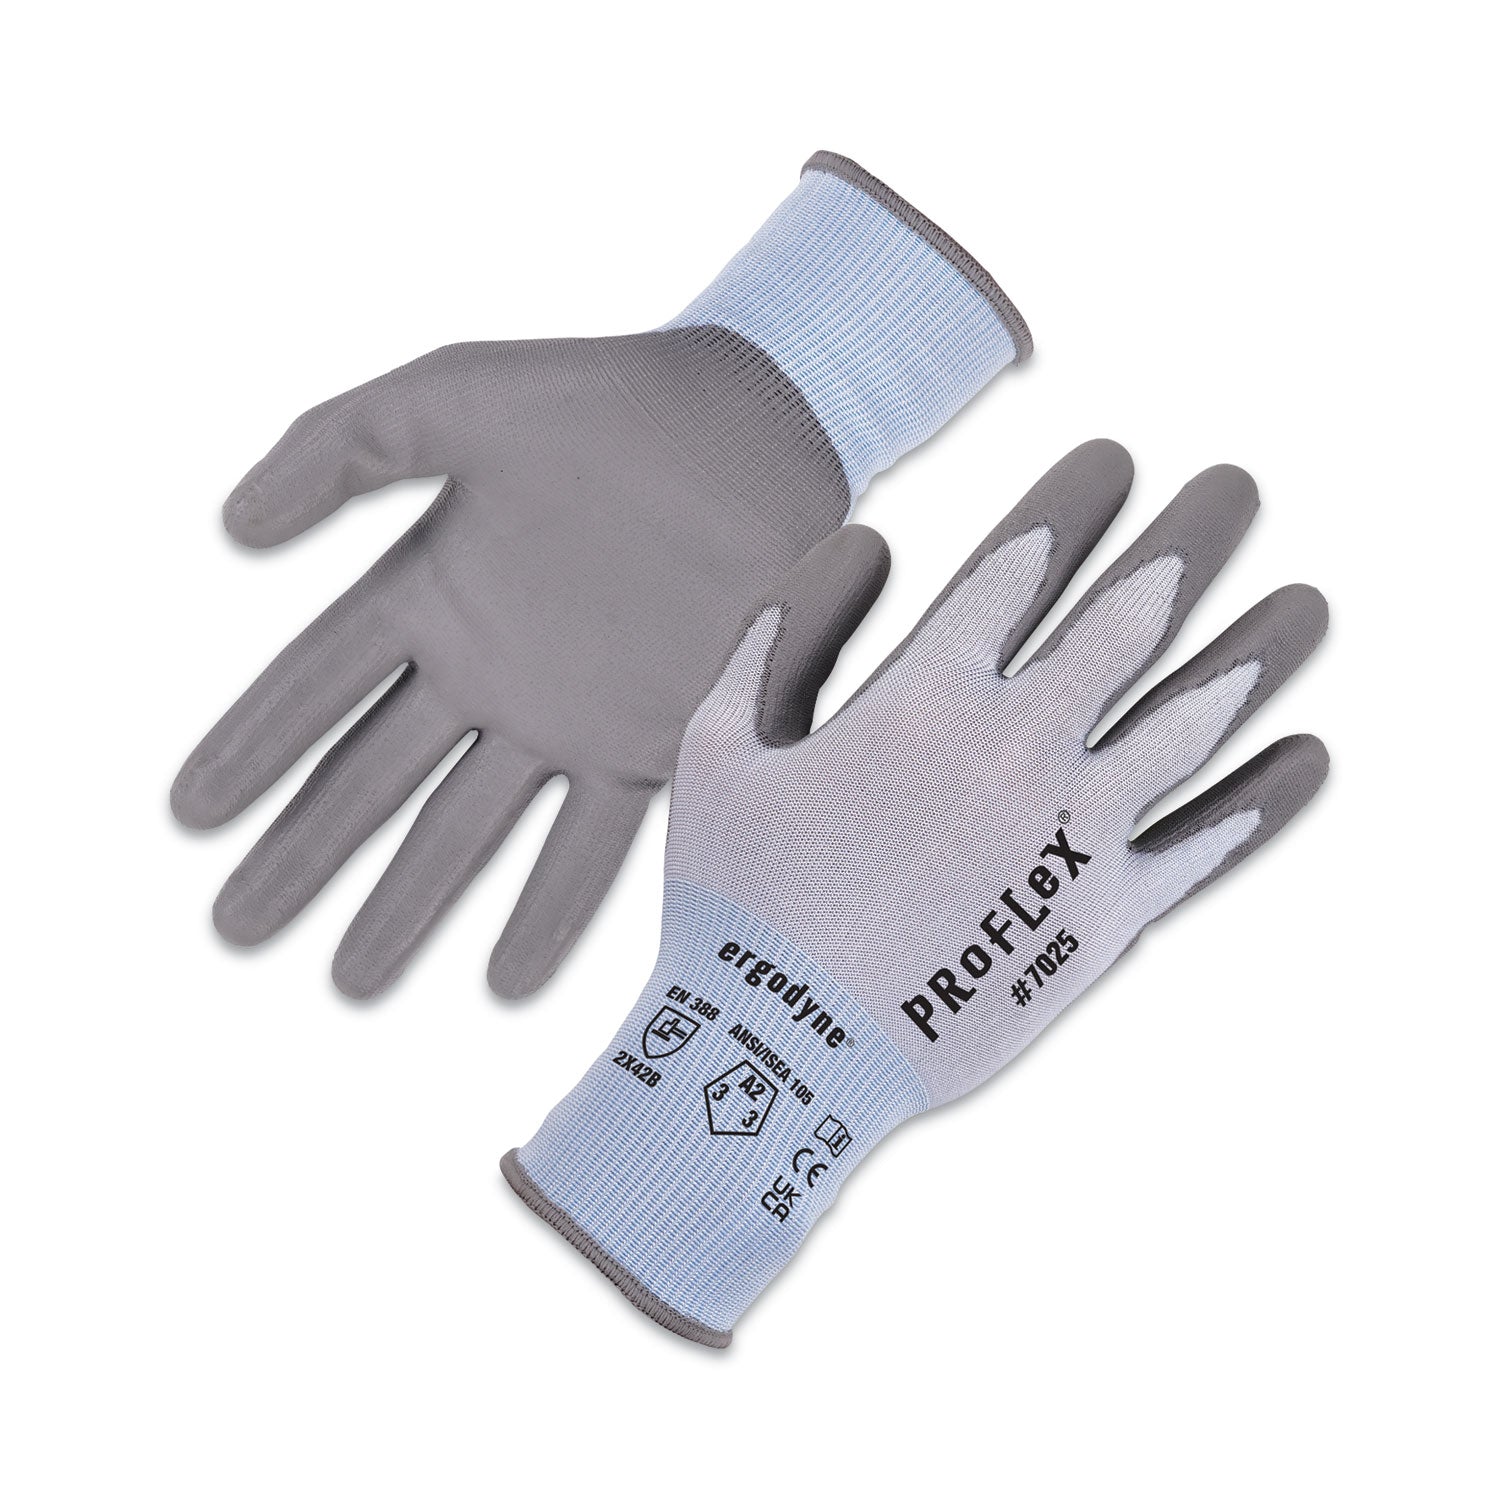 proflex-7025-ansi-a2-pu-coated-cr-gloves-blue-2x-large-12-pairs-pack-ships-in-1-3-business-days_ego10426 - 1